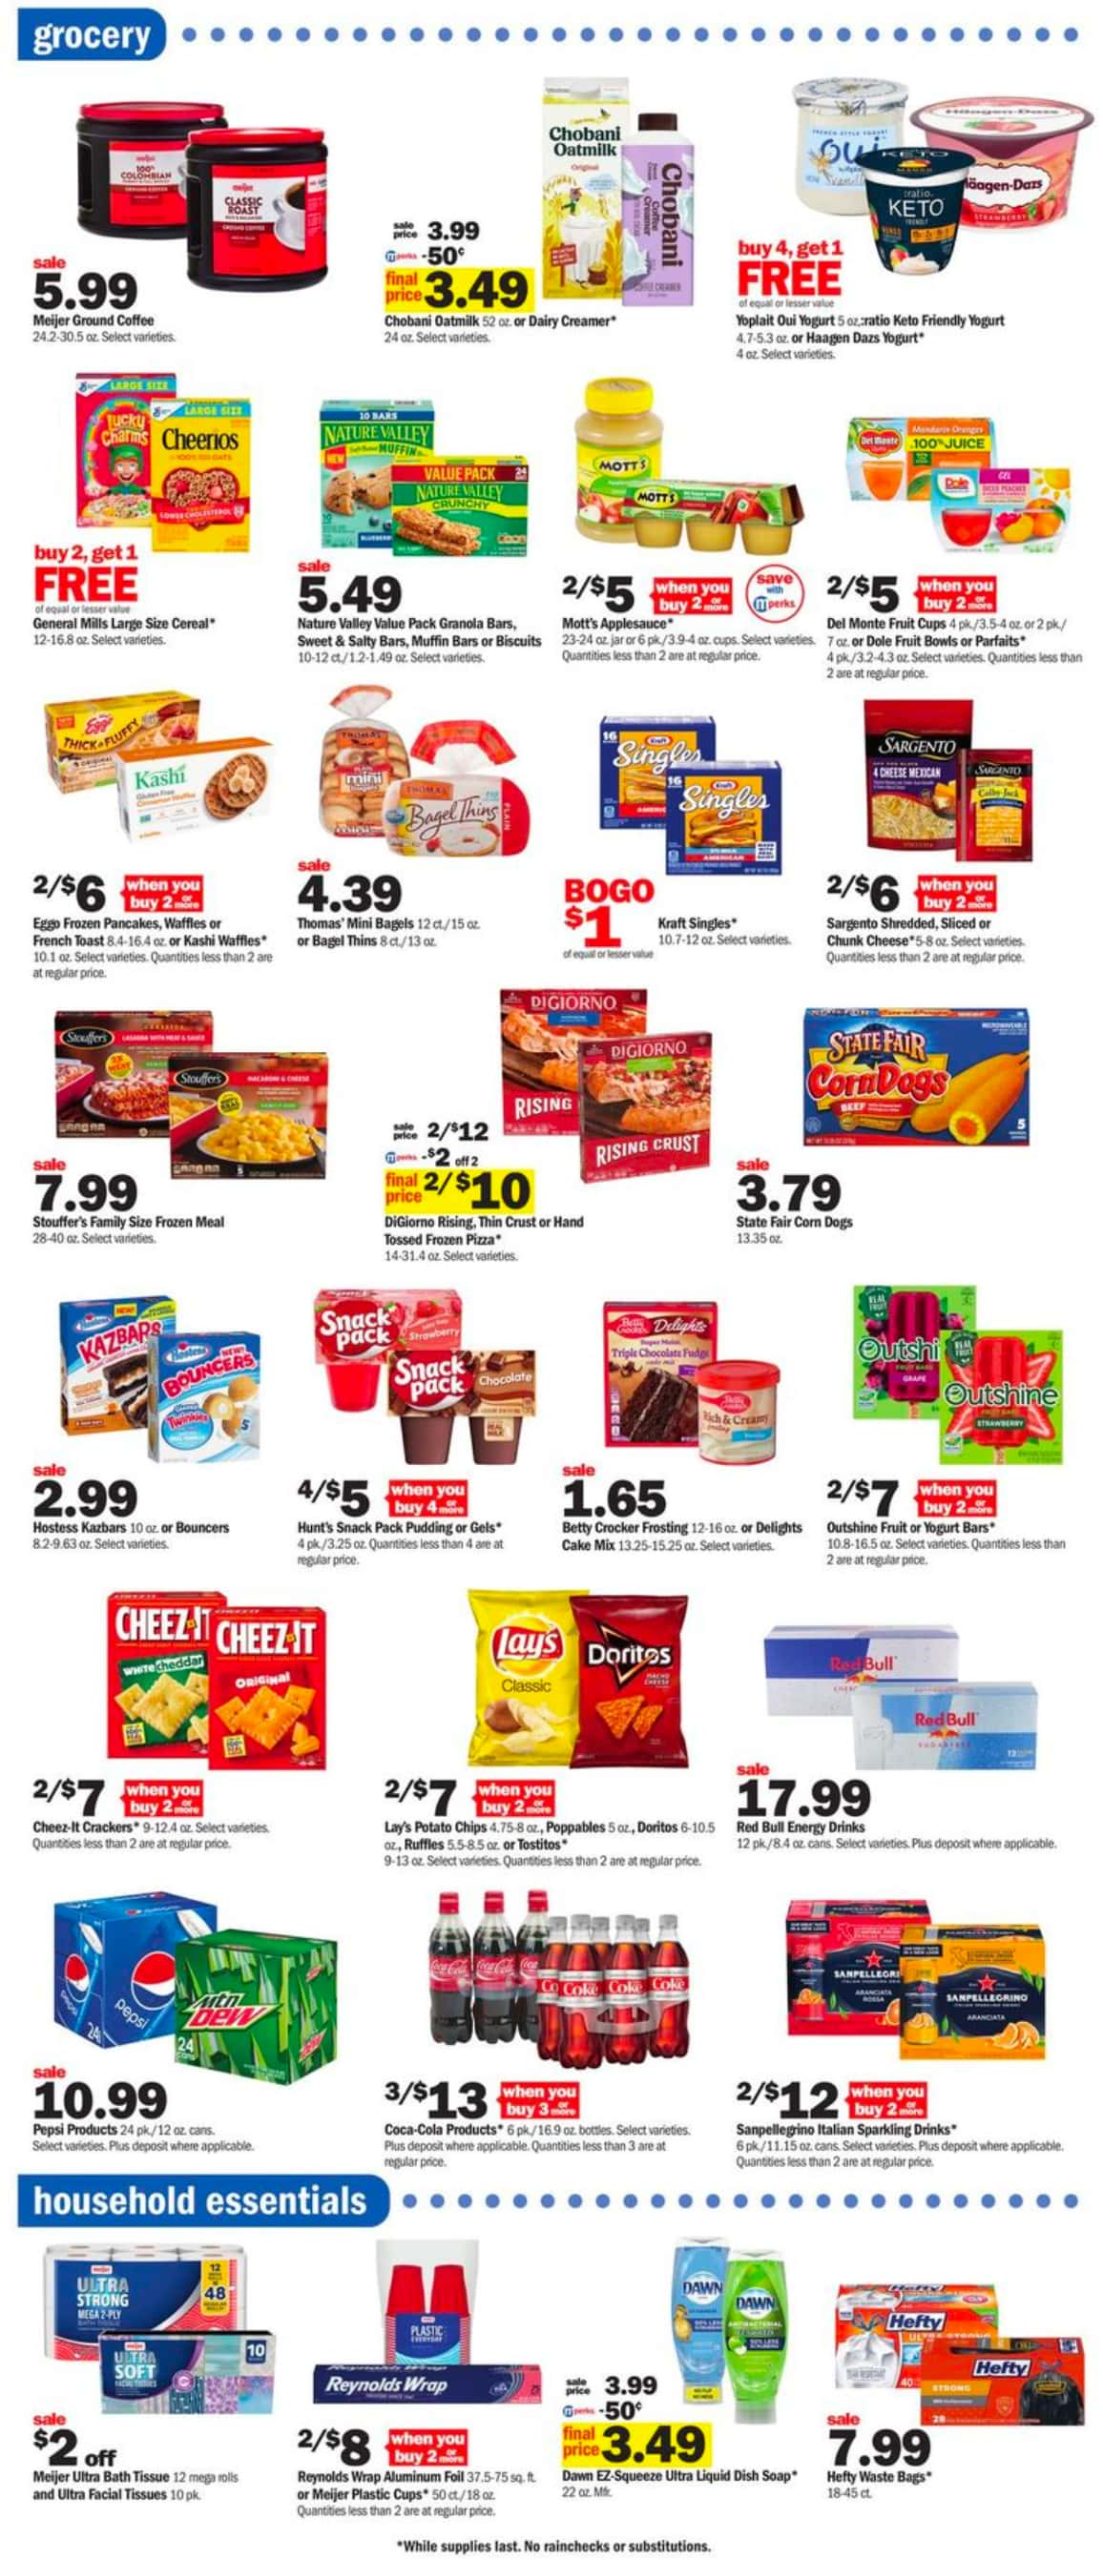 Meijer Weekly Ad May 1 to May 7, 2022 4 – meijer ad 5 scaled